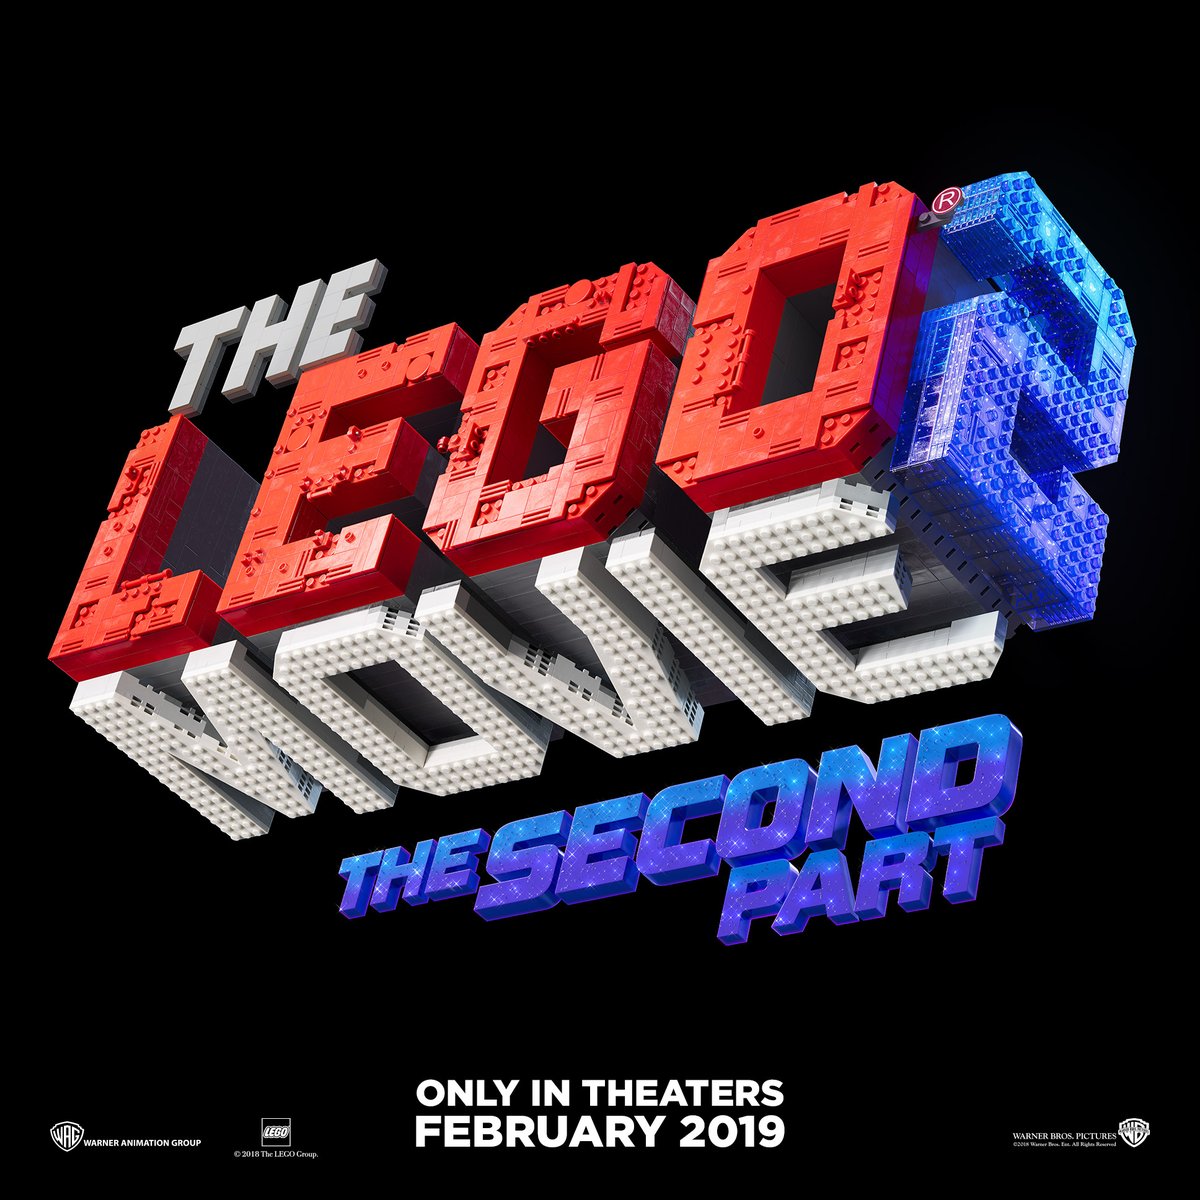 Get Your MOC's In The LEGO Movie 2's End Credits - FBTB